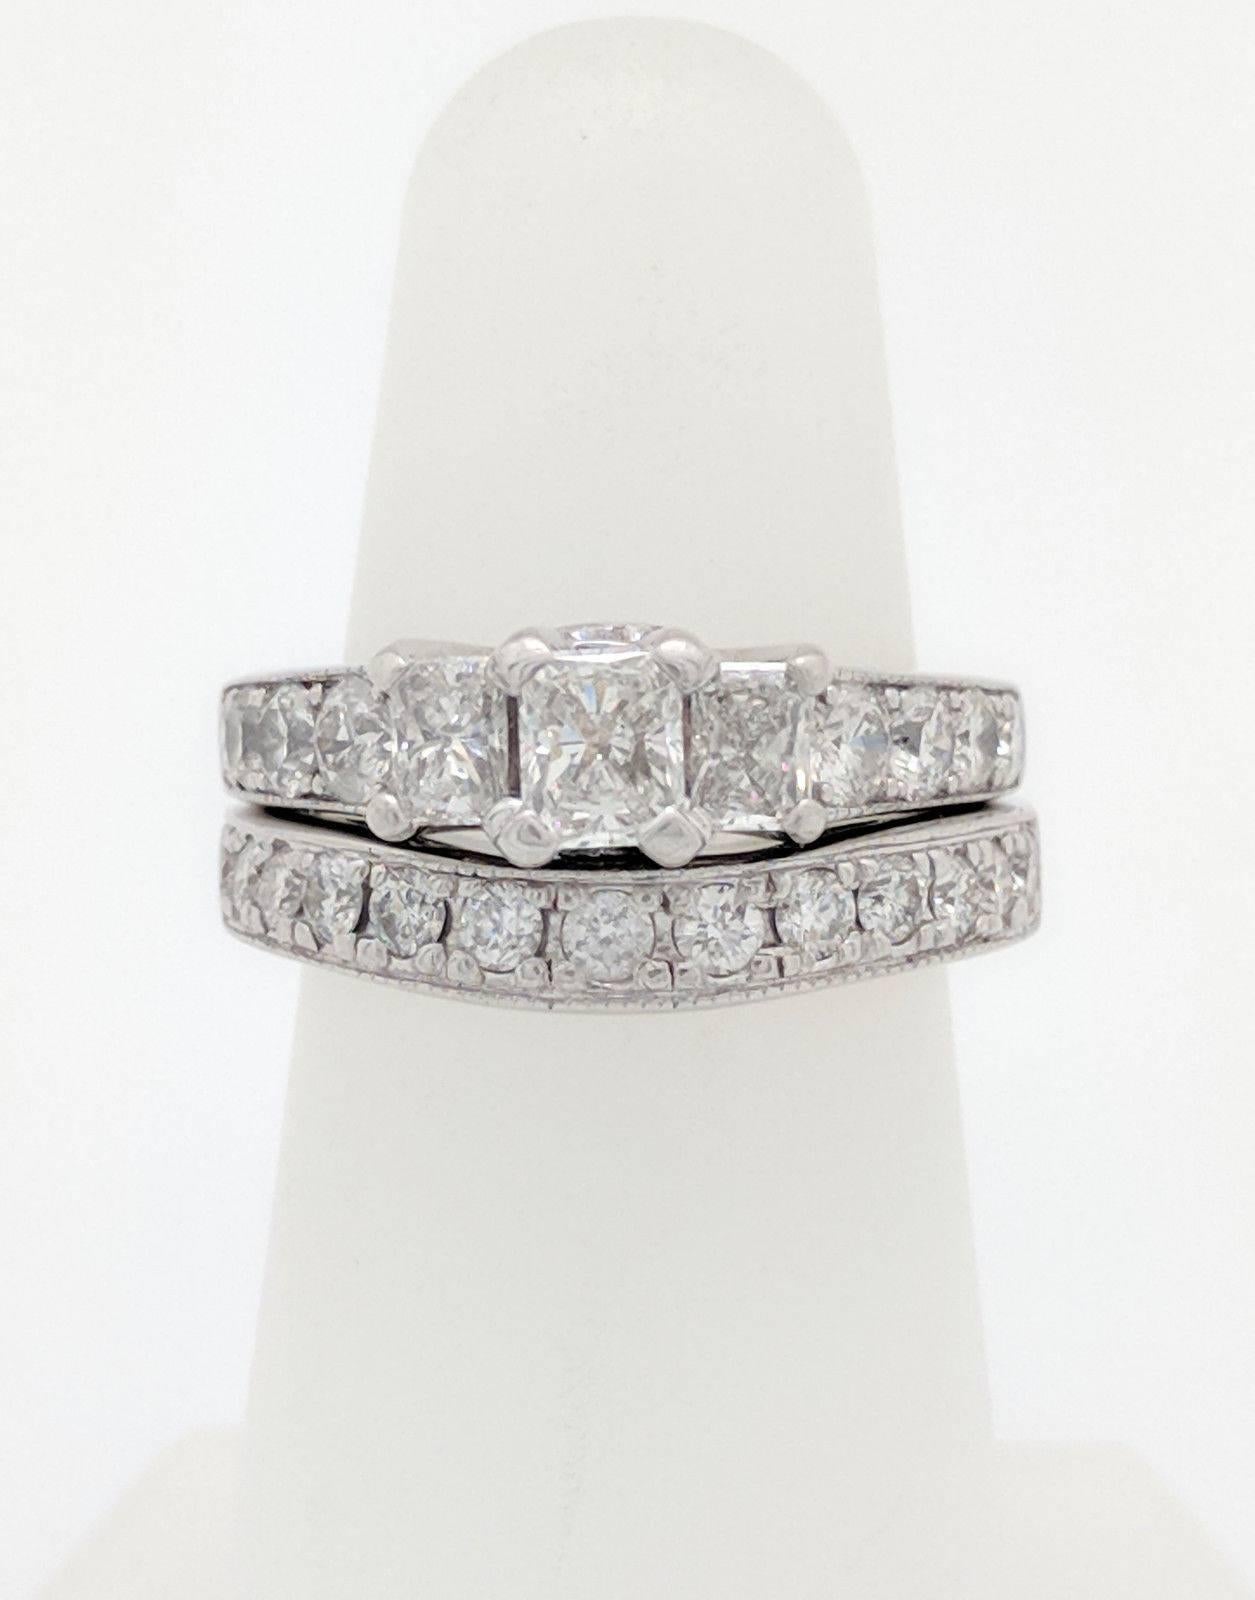 14K White Gold Radiant Cut 3-Stone 2.15CTW Diamond Engagement Ring

You are viewing a beautiful 3-Stone Diamond Engagement Ring with Matching Band. The engagement ring features (1) .35ct natural radiant cut diamond, (2) .20ct radiant cut diamonds